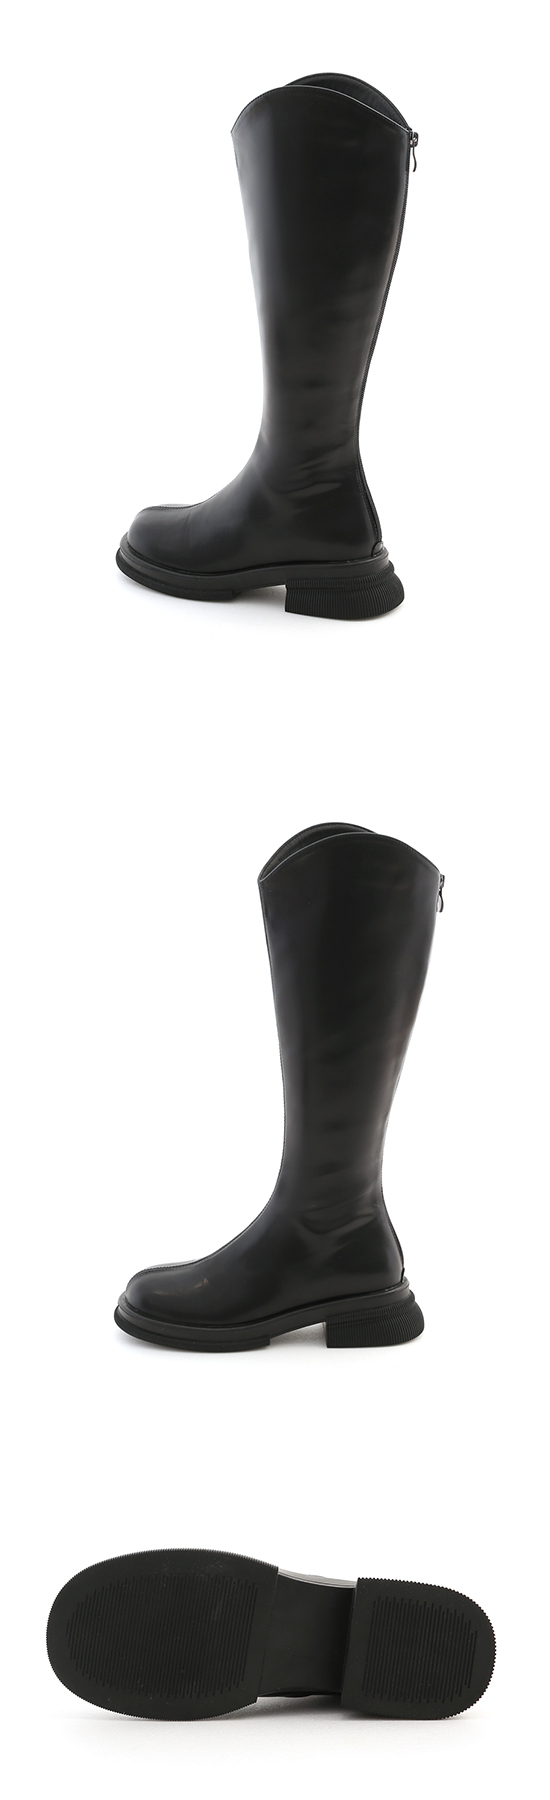 V-cut Under-The-Knee Boots Black